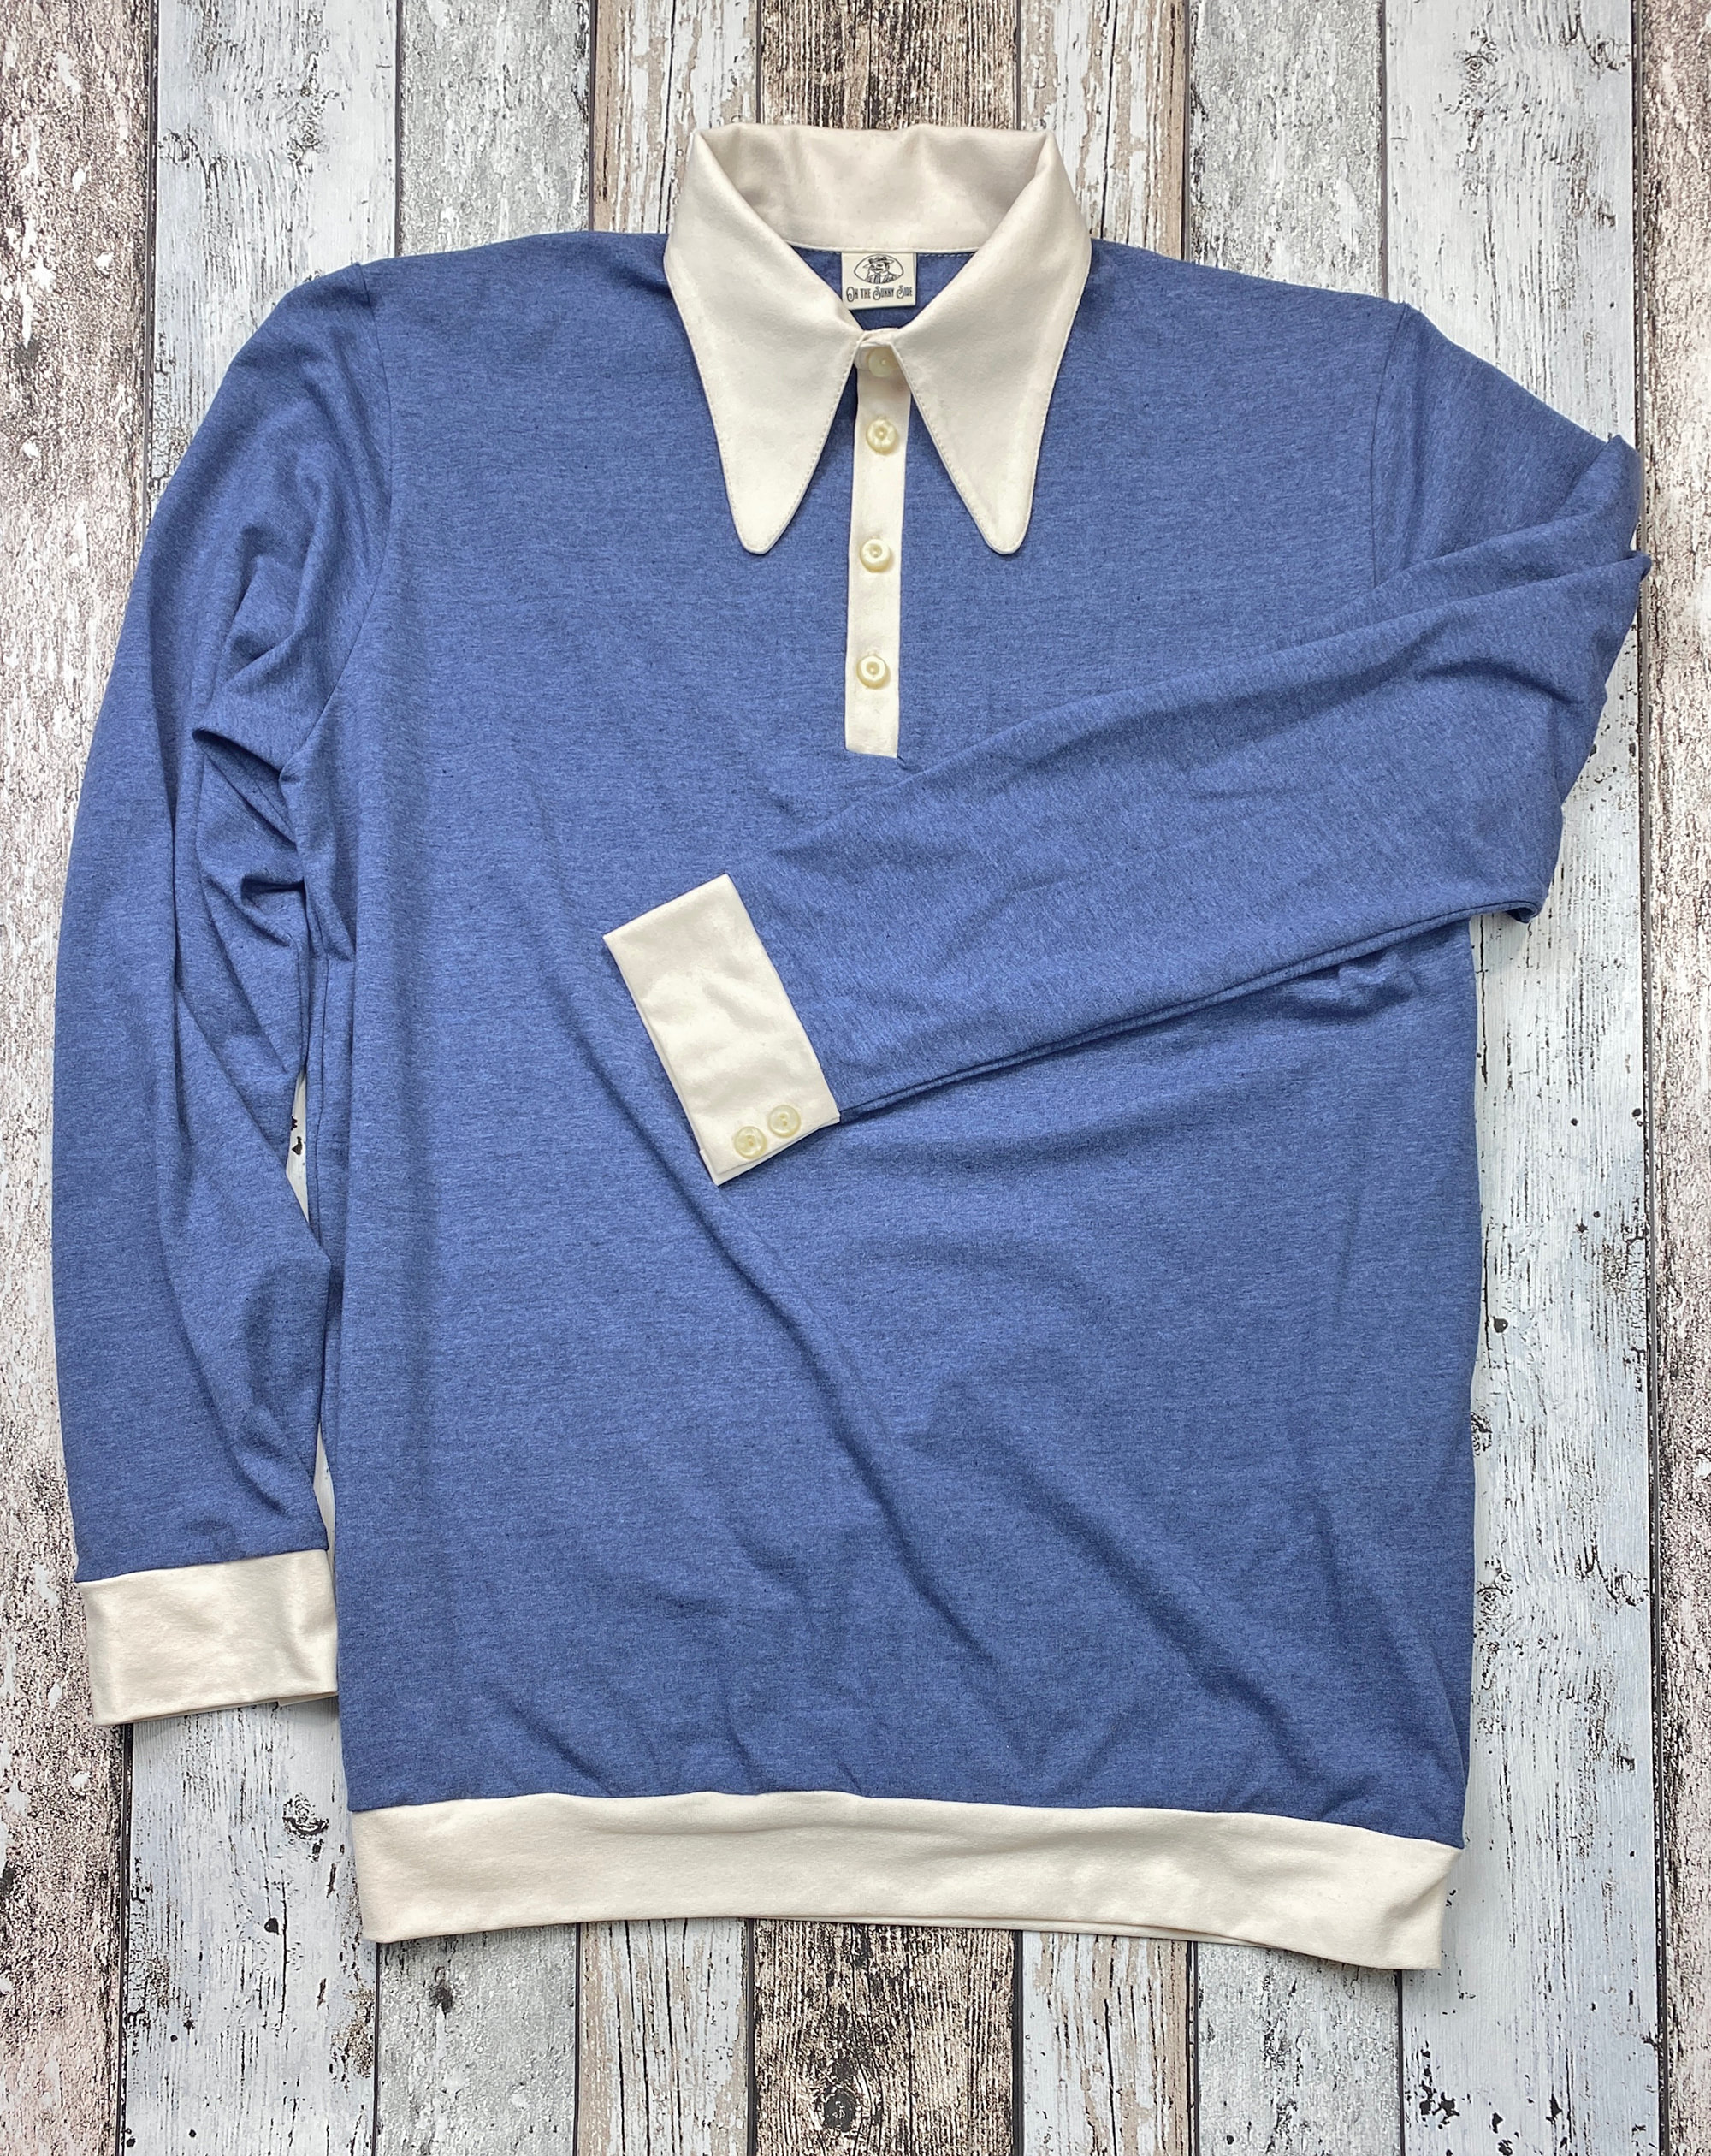 vintage style polo shirt long sleeve with 1930s spear point collar